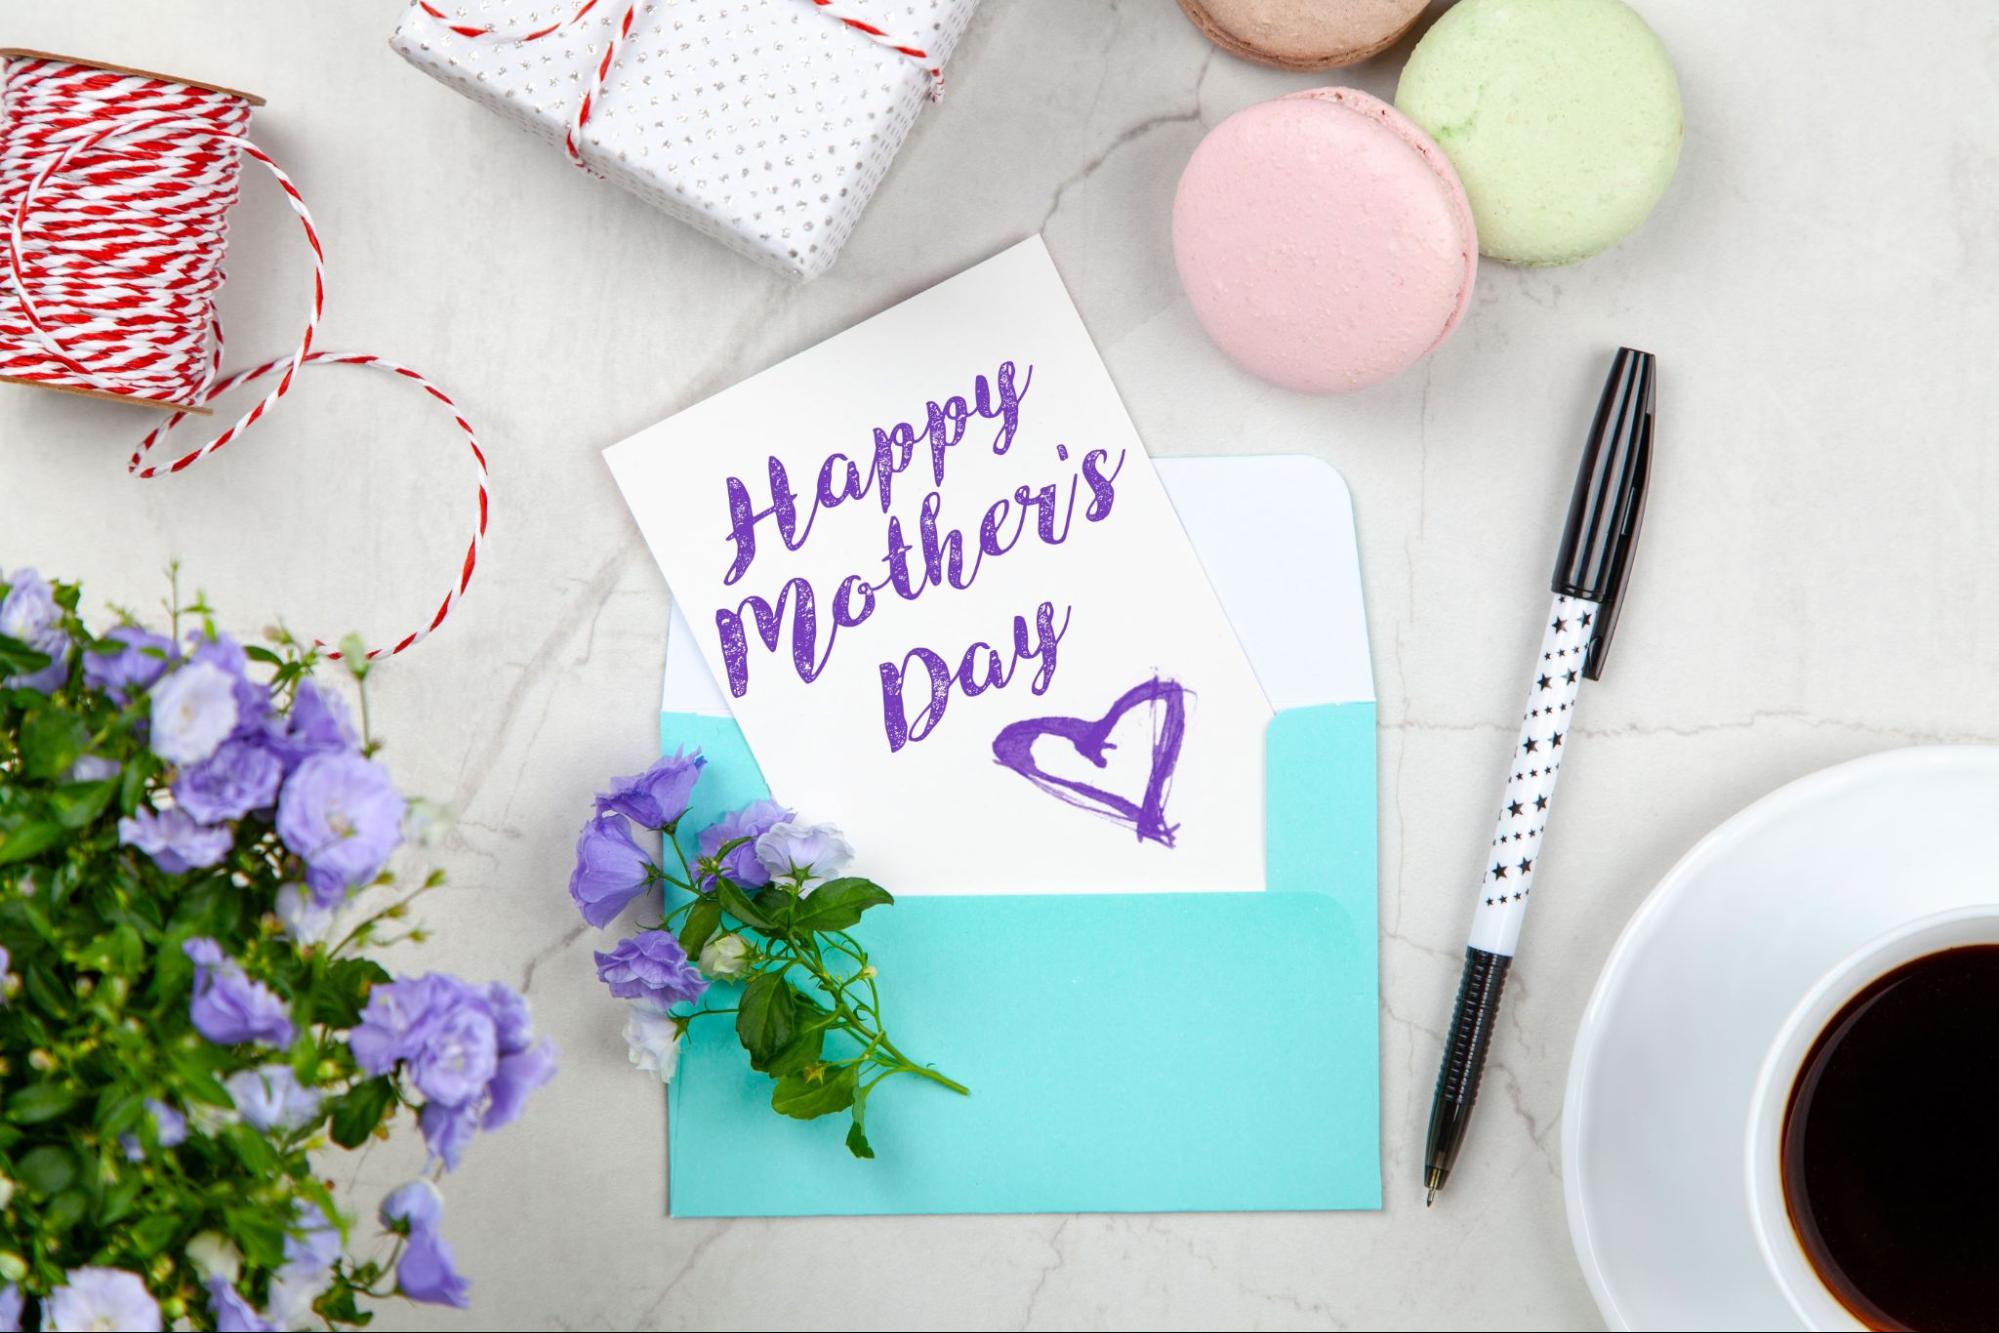 A handmade Mother?s Day card sits on a marble table with flowers, coffee, wrapped gifts, and macaroons